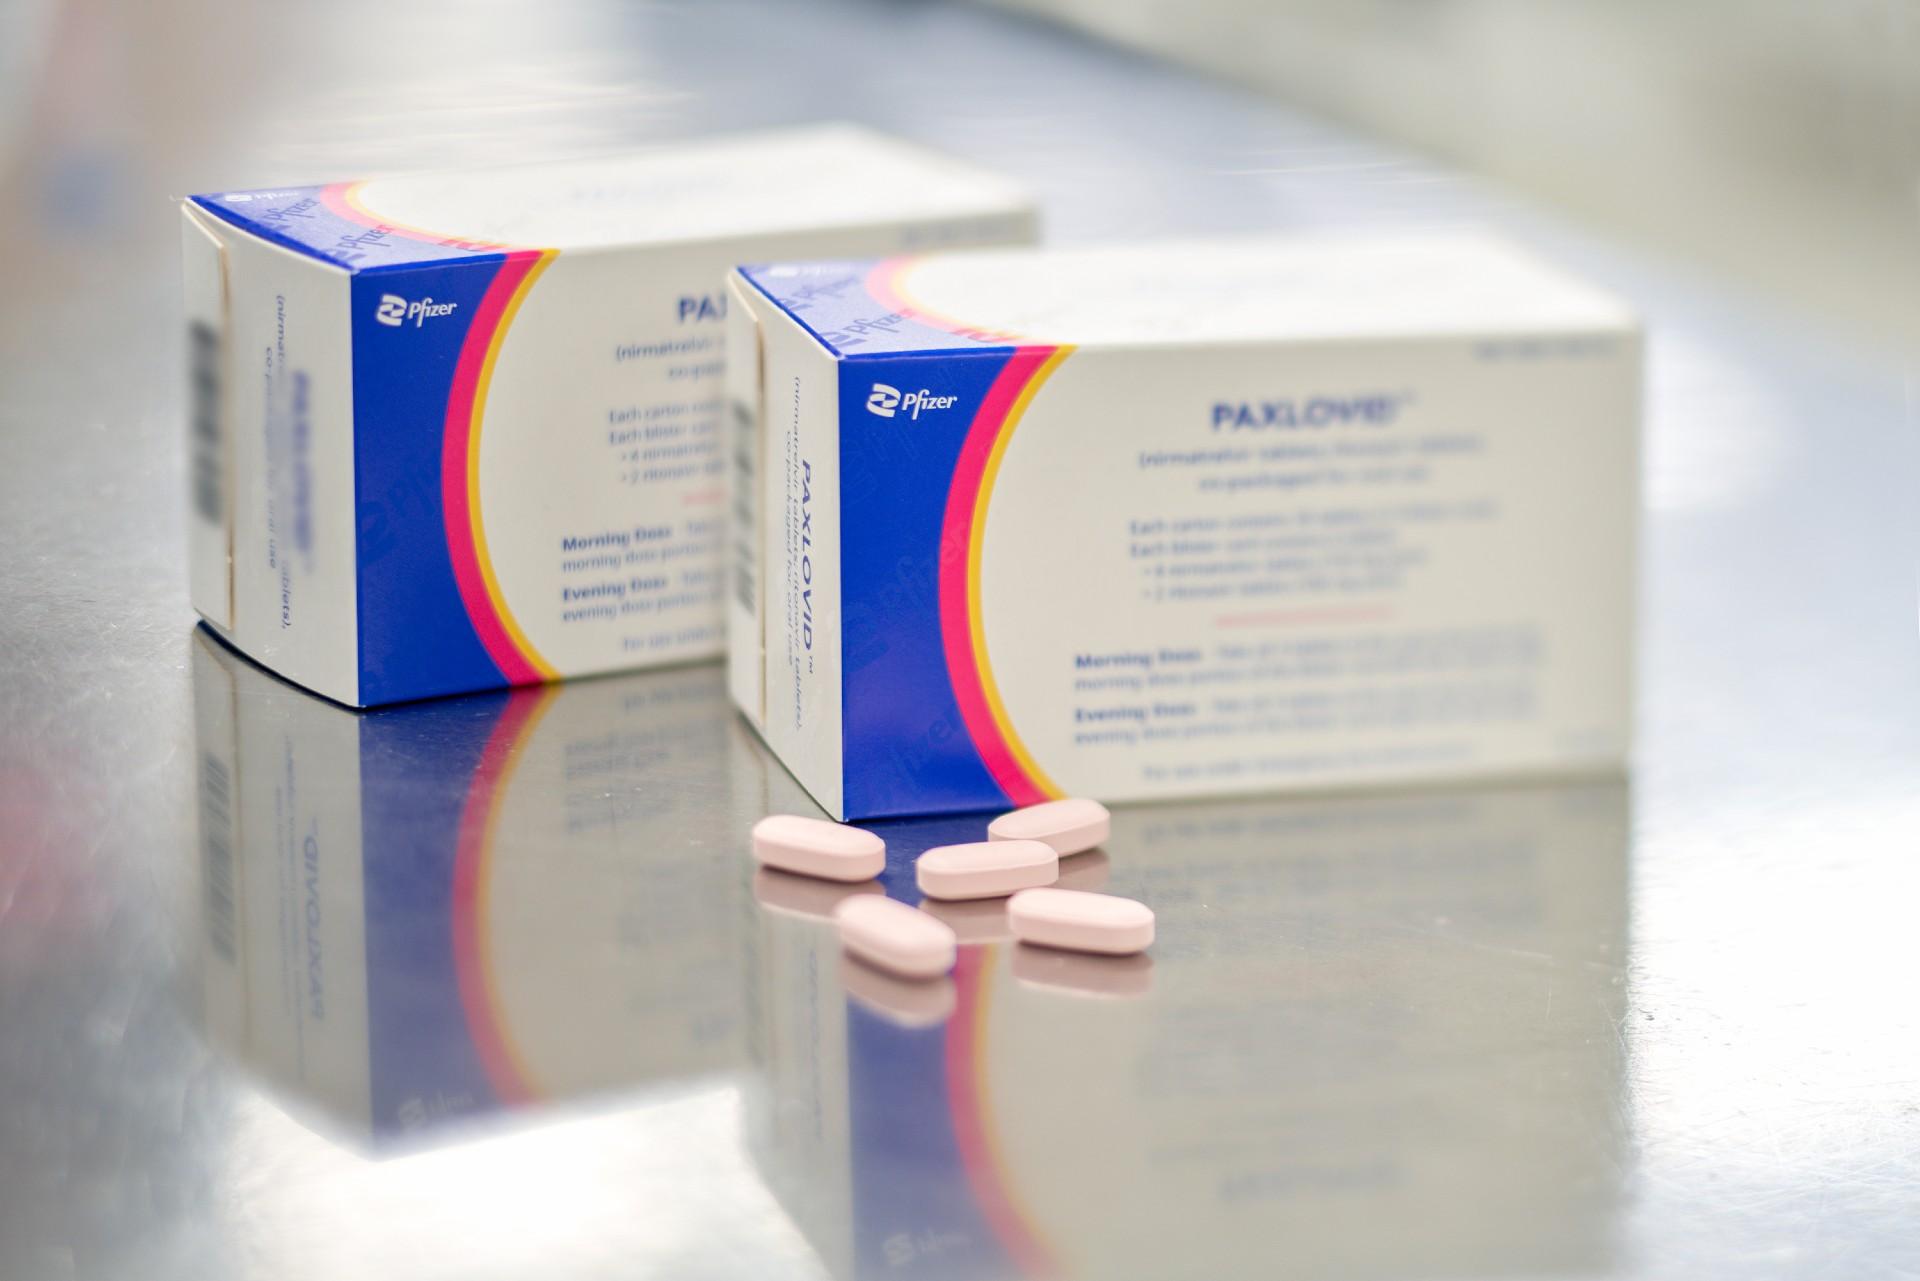 The first shipment of the COVID-19 oral drug Paxlovid arrived in Hong Kong yesterday (March 14), and has been distributed to the Hospital Authority for application today (March 15).